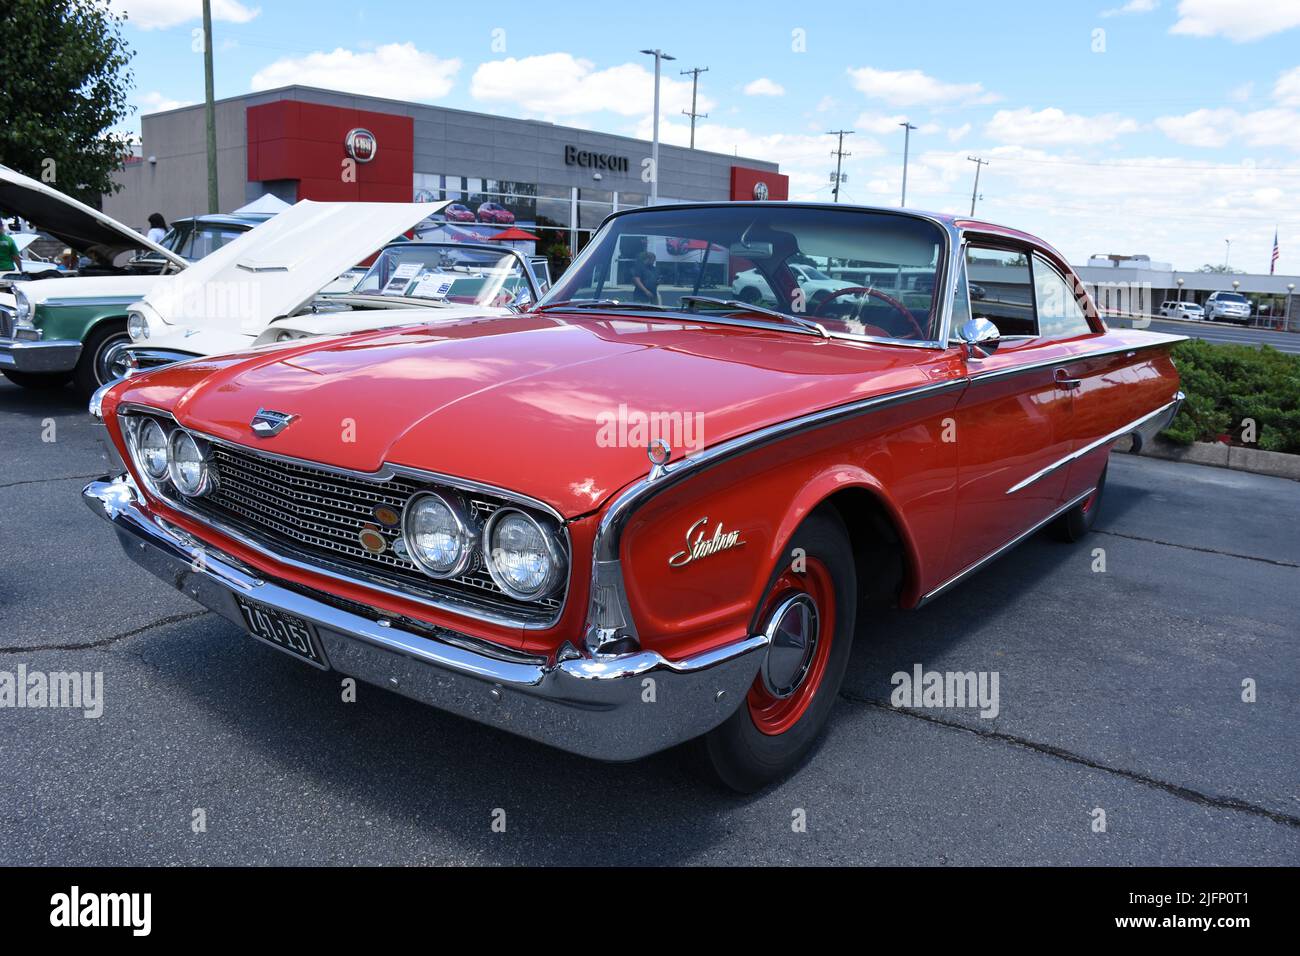 A 1960 Ford Starliner Hard Top on display at a car show. Stock Photo